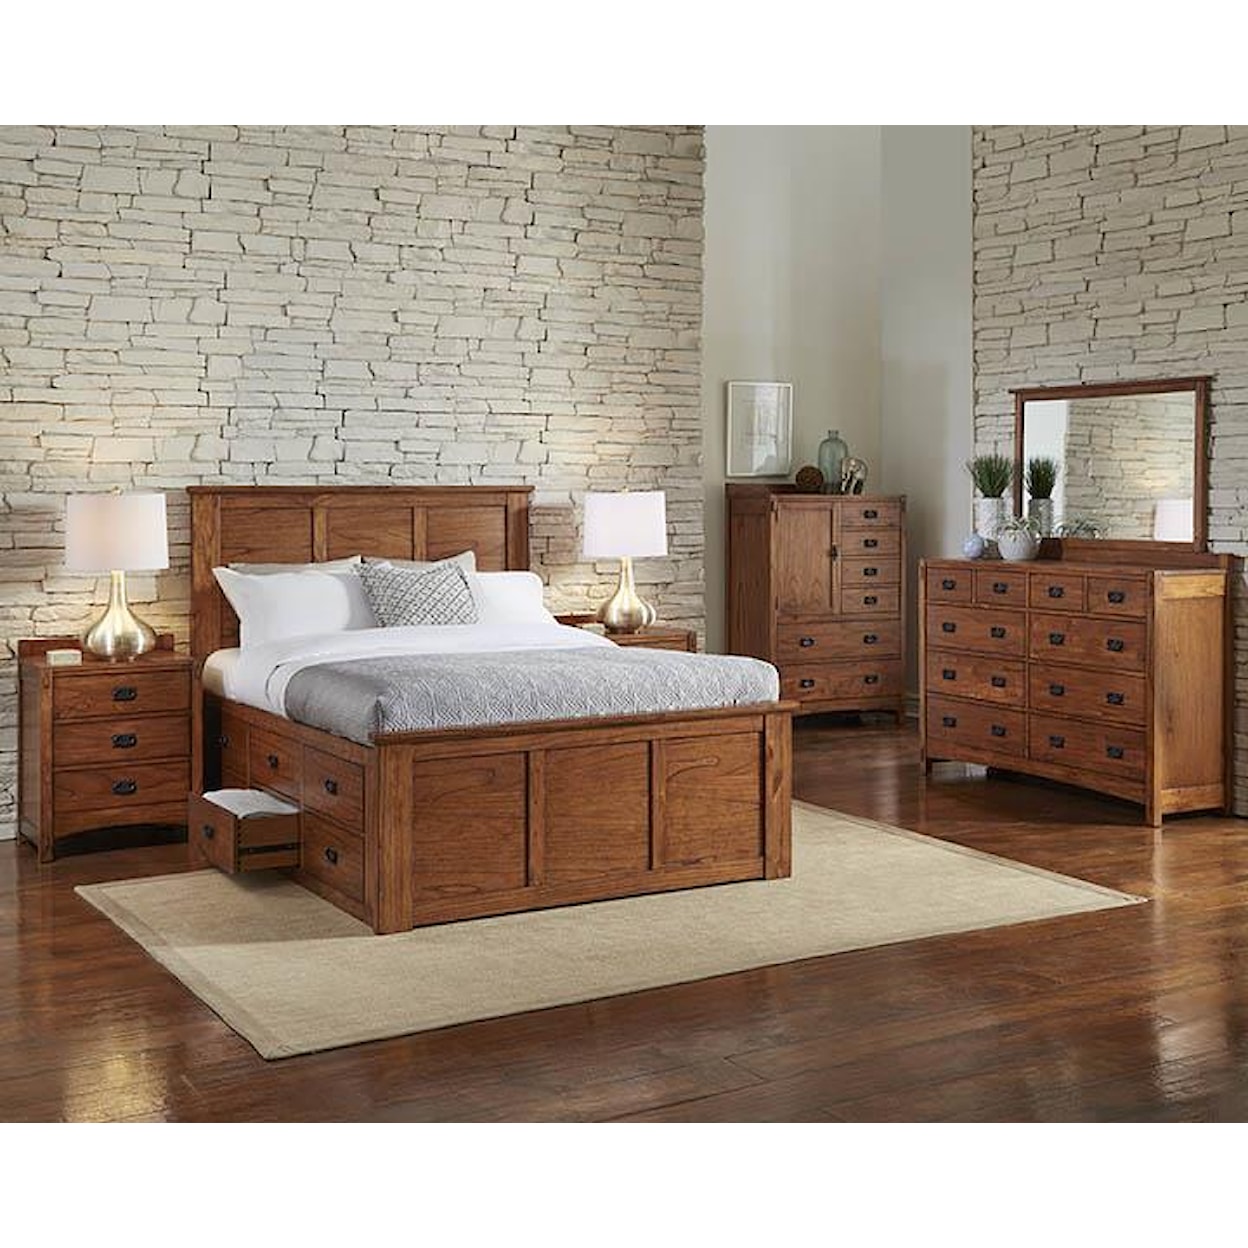 AAmerica Mission Hill Queen Captain Bed